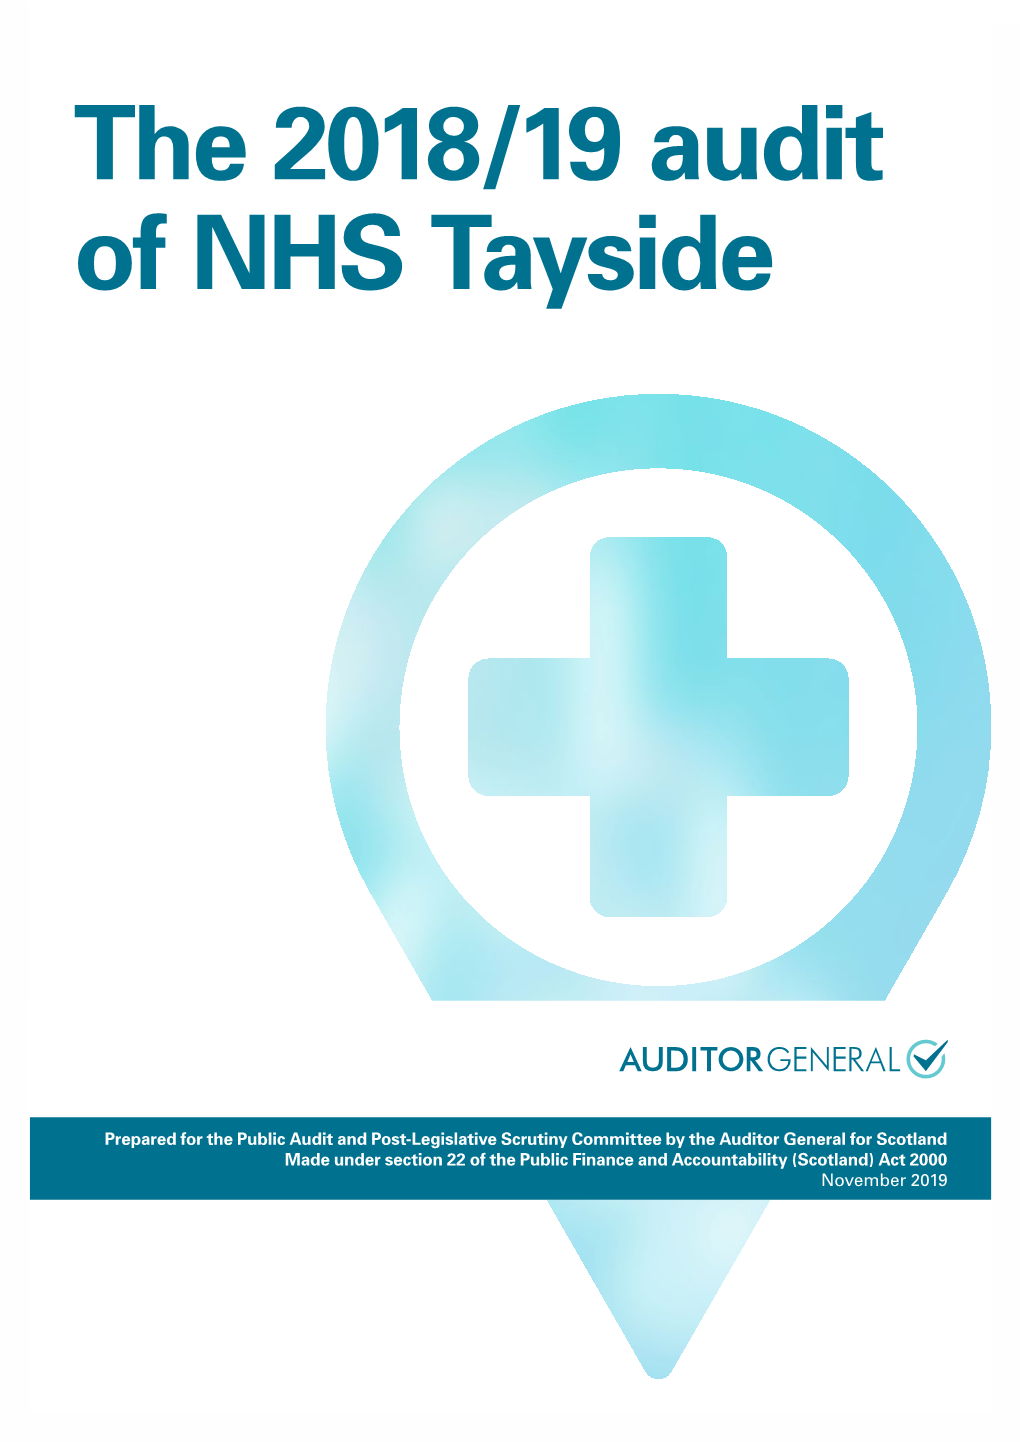 The 2018/19 Audit of NHS Tayside